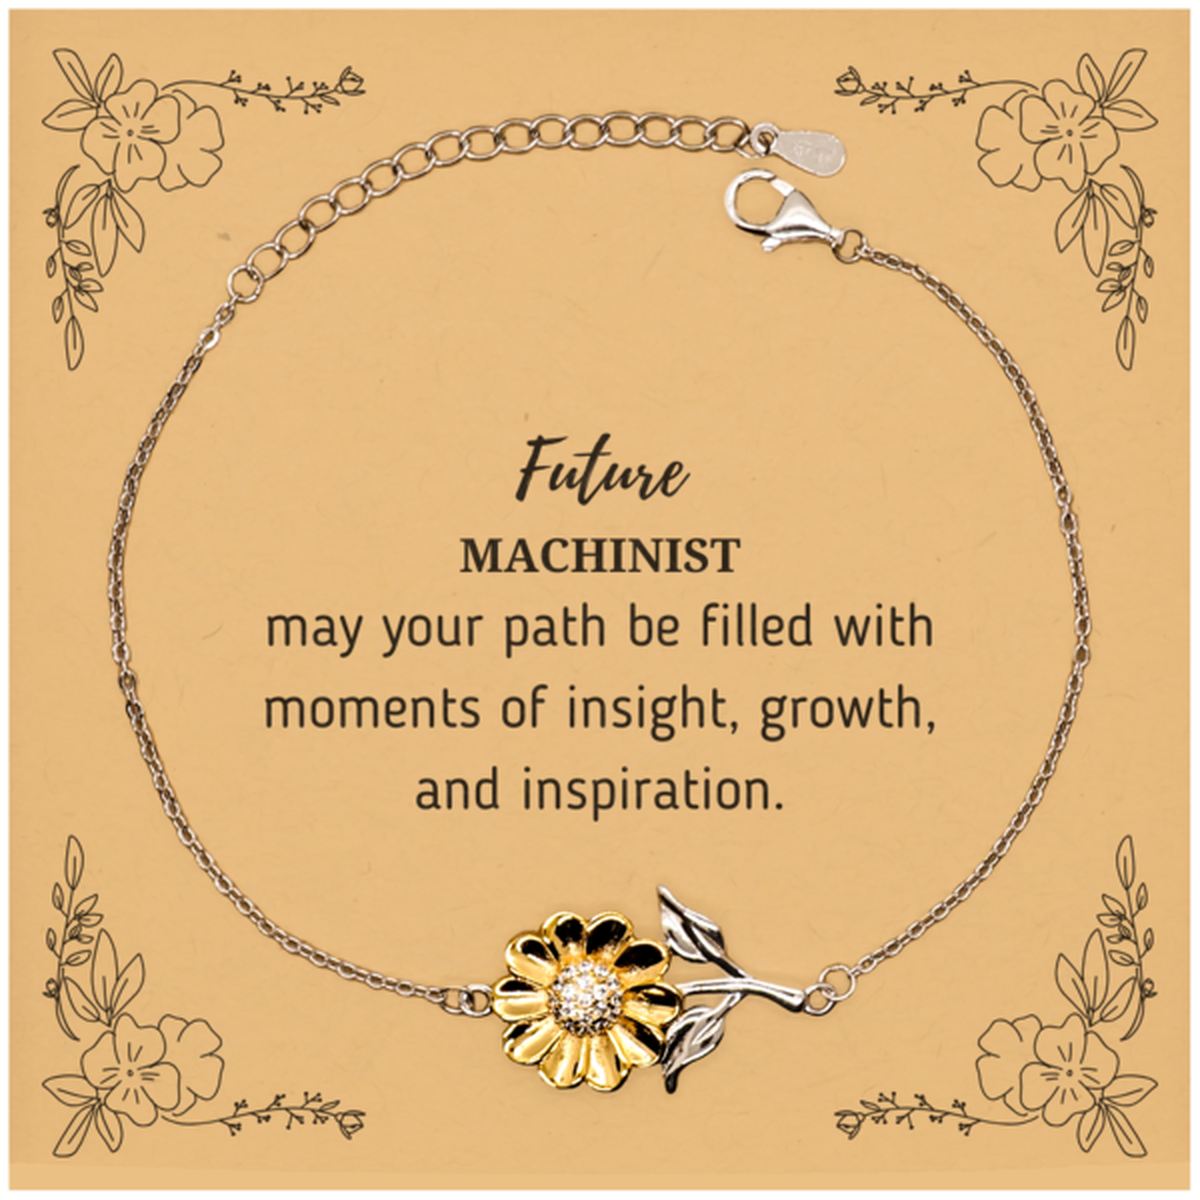 Future Machinist Gifts, May your path be filled with moments of insight, Graduation Gifts for New Machinist, Christmas Unique Sunflower Bracelet For Men, Women, Friends